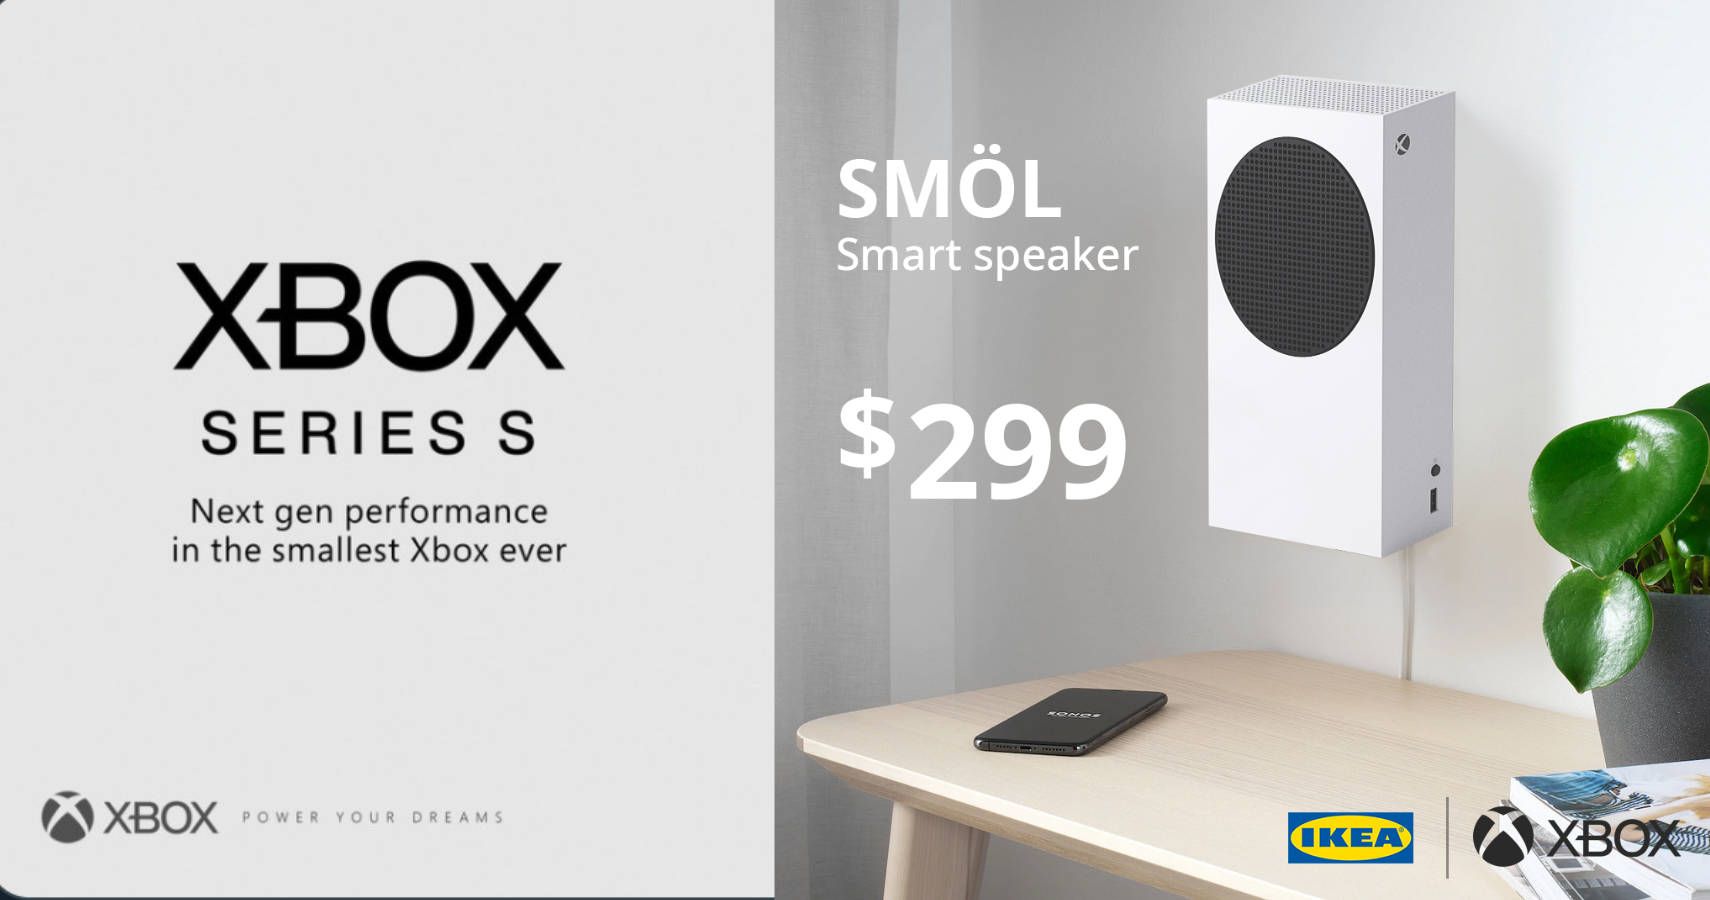 left side of image series s poster while the right side shows the console on a wall above a table with the words SMOL speaker next to it in an IKEA catalogue style.